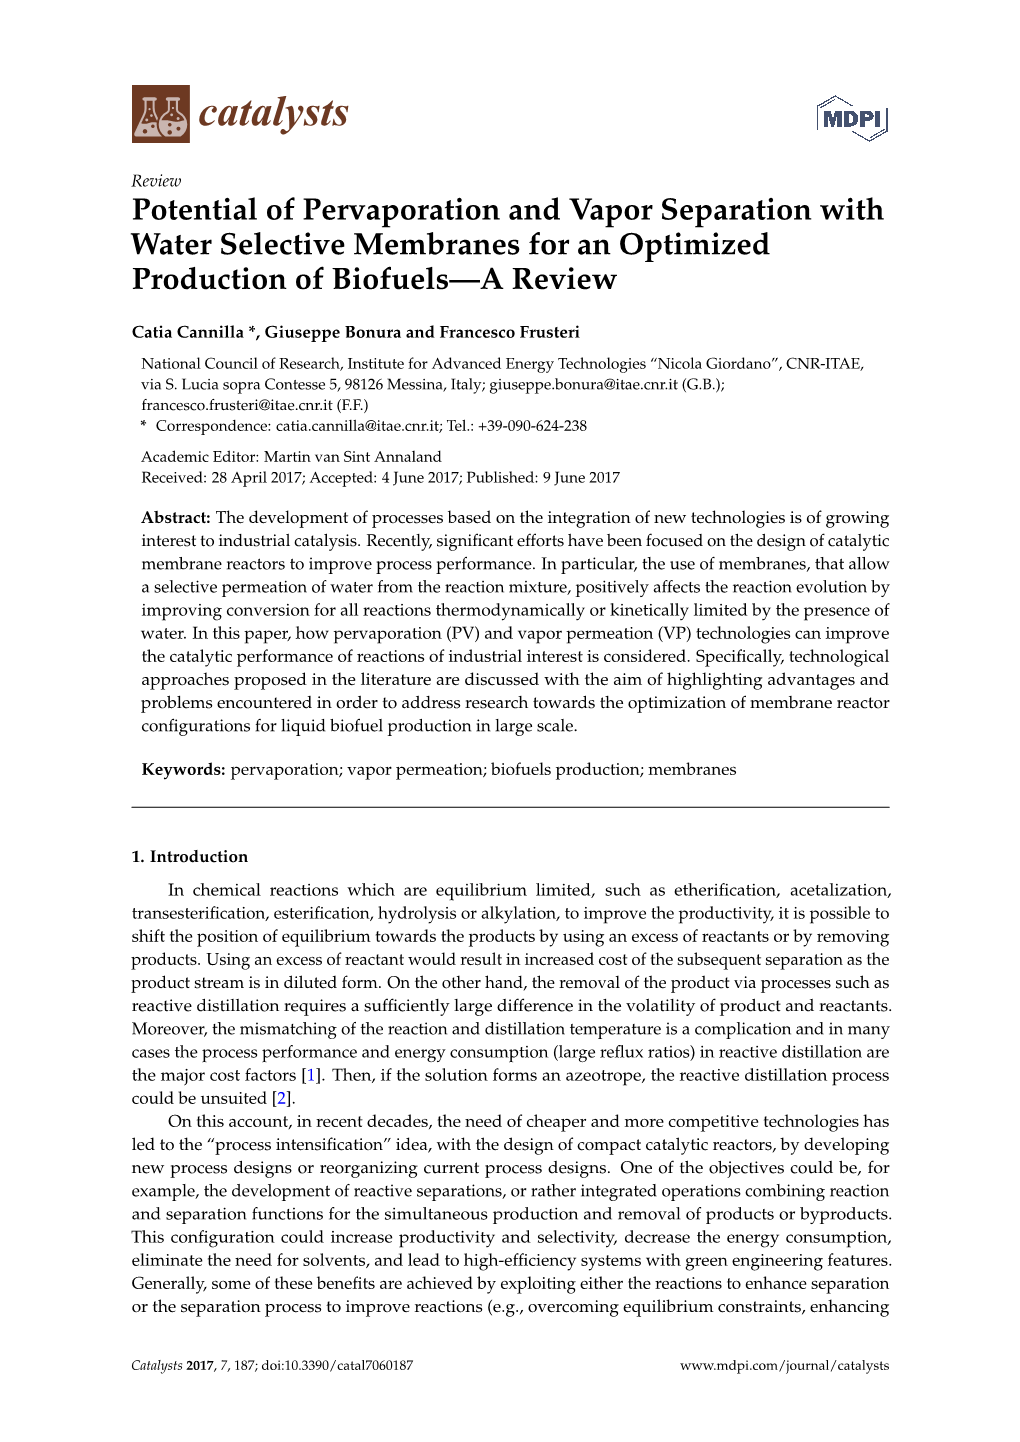 Potential of Pervaporation and Vapor Separation with Water Selective Membranes for an Optimized Production of Biofuels—A Review